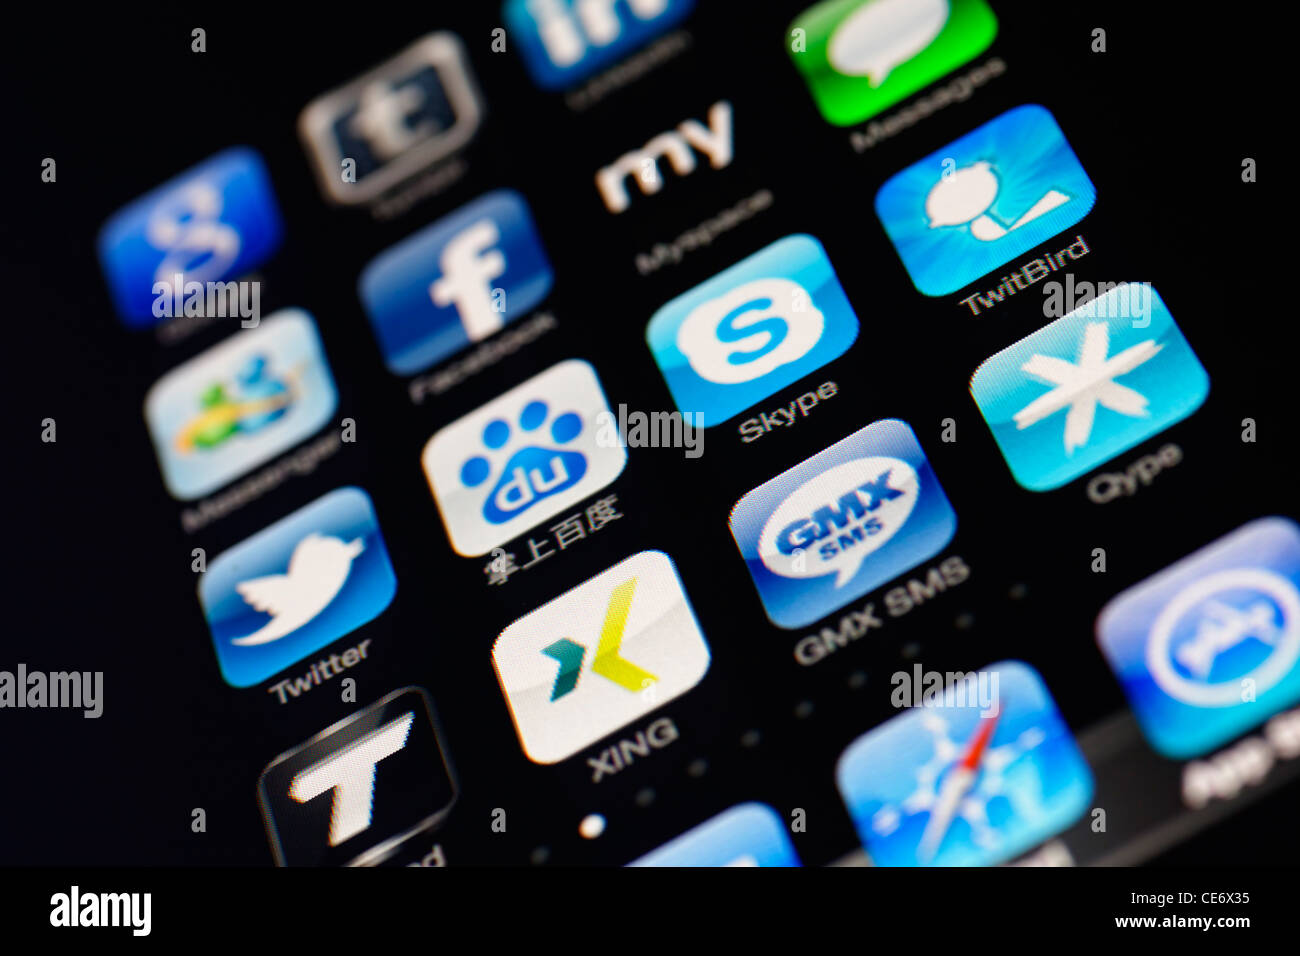 Muenster, Germany, January 26, 2012: Image of the iphone touch screen. Display shows a collection of useful apps with blue color Stock Photo